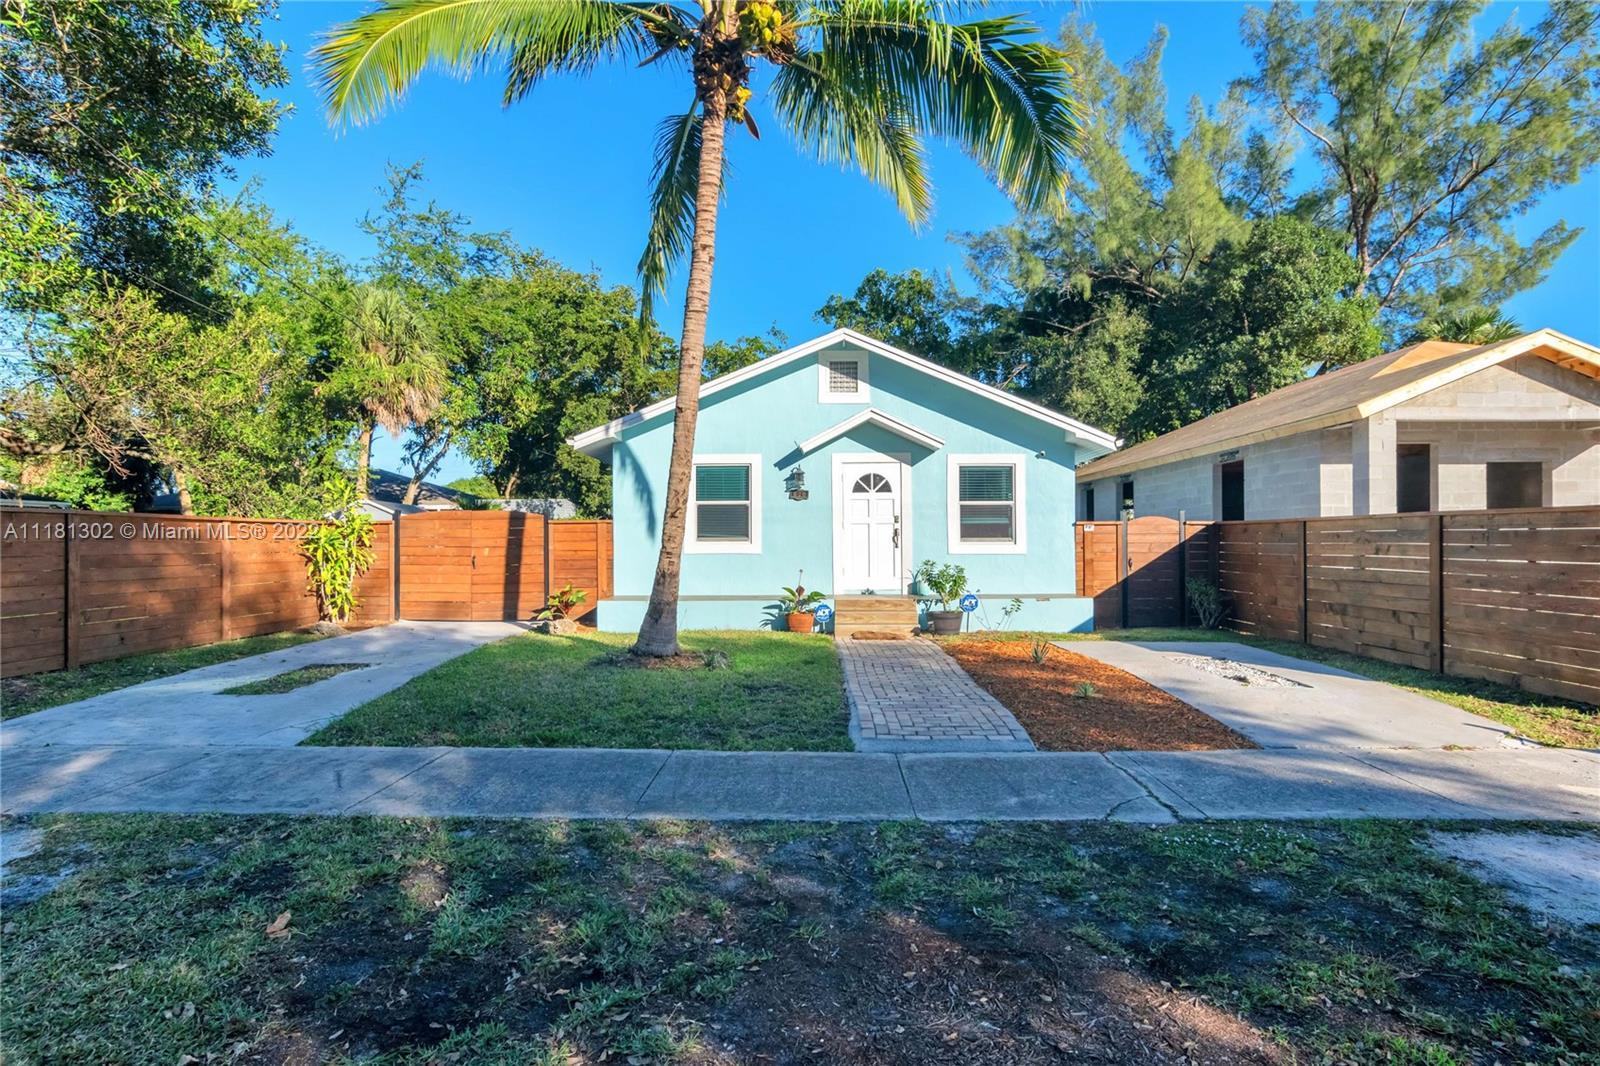 Fully Remodeled and Move-in Ready Home with Great Outdoor Space. This home offers a New Cedar Fence,